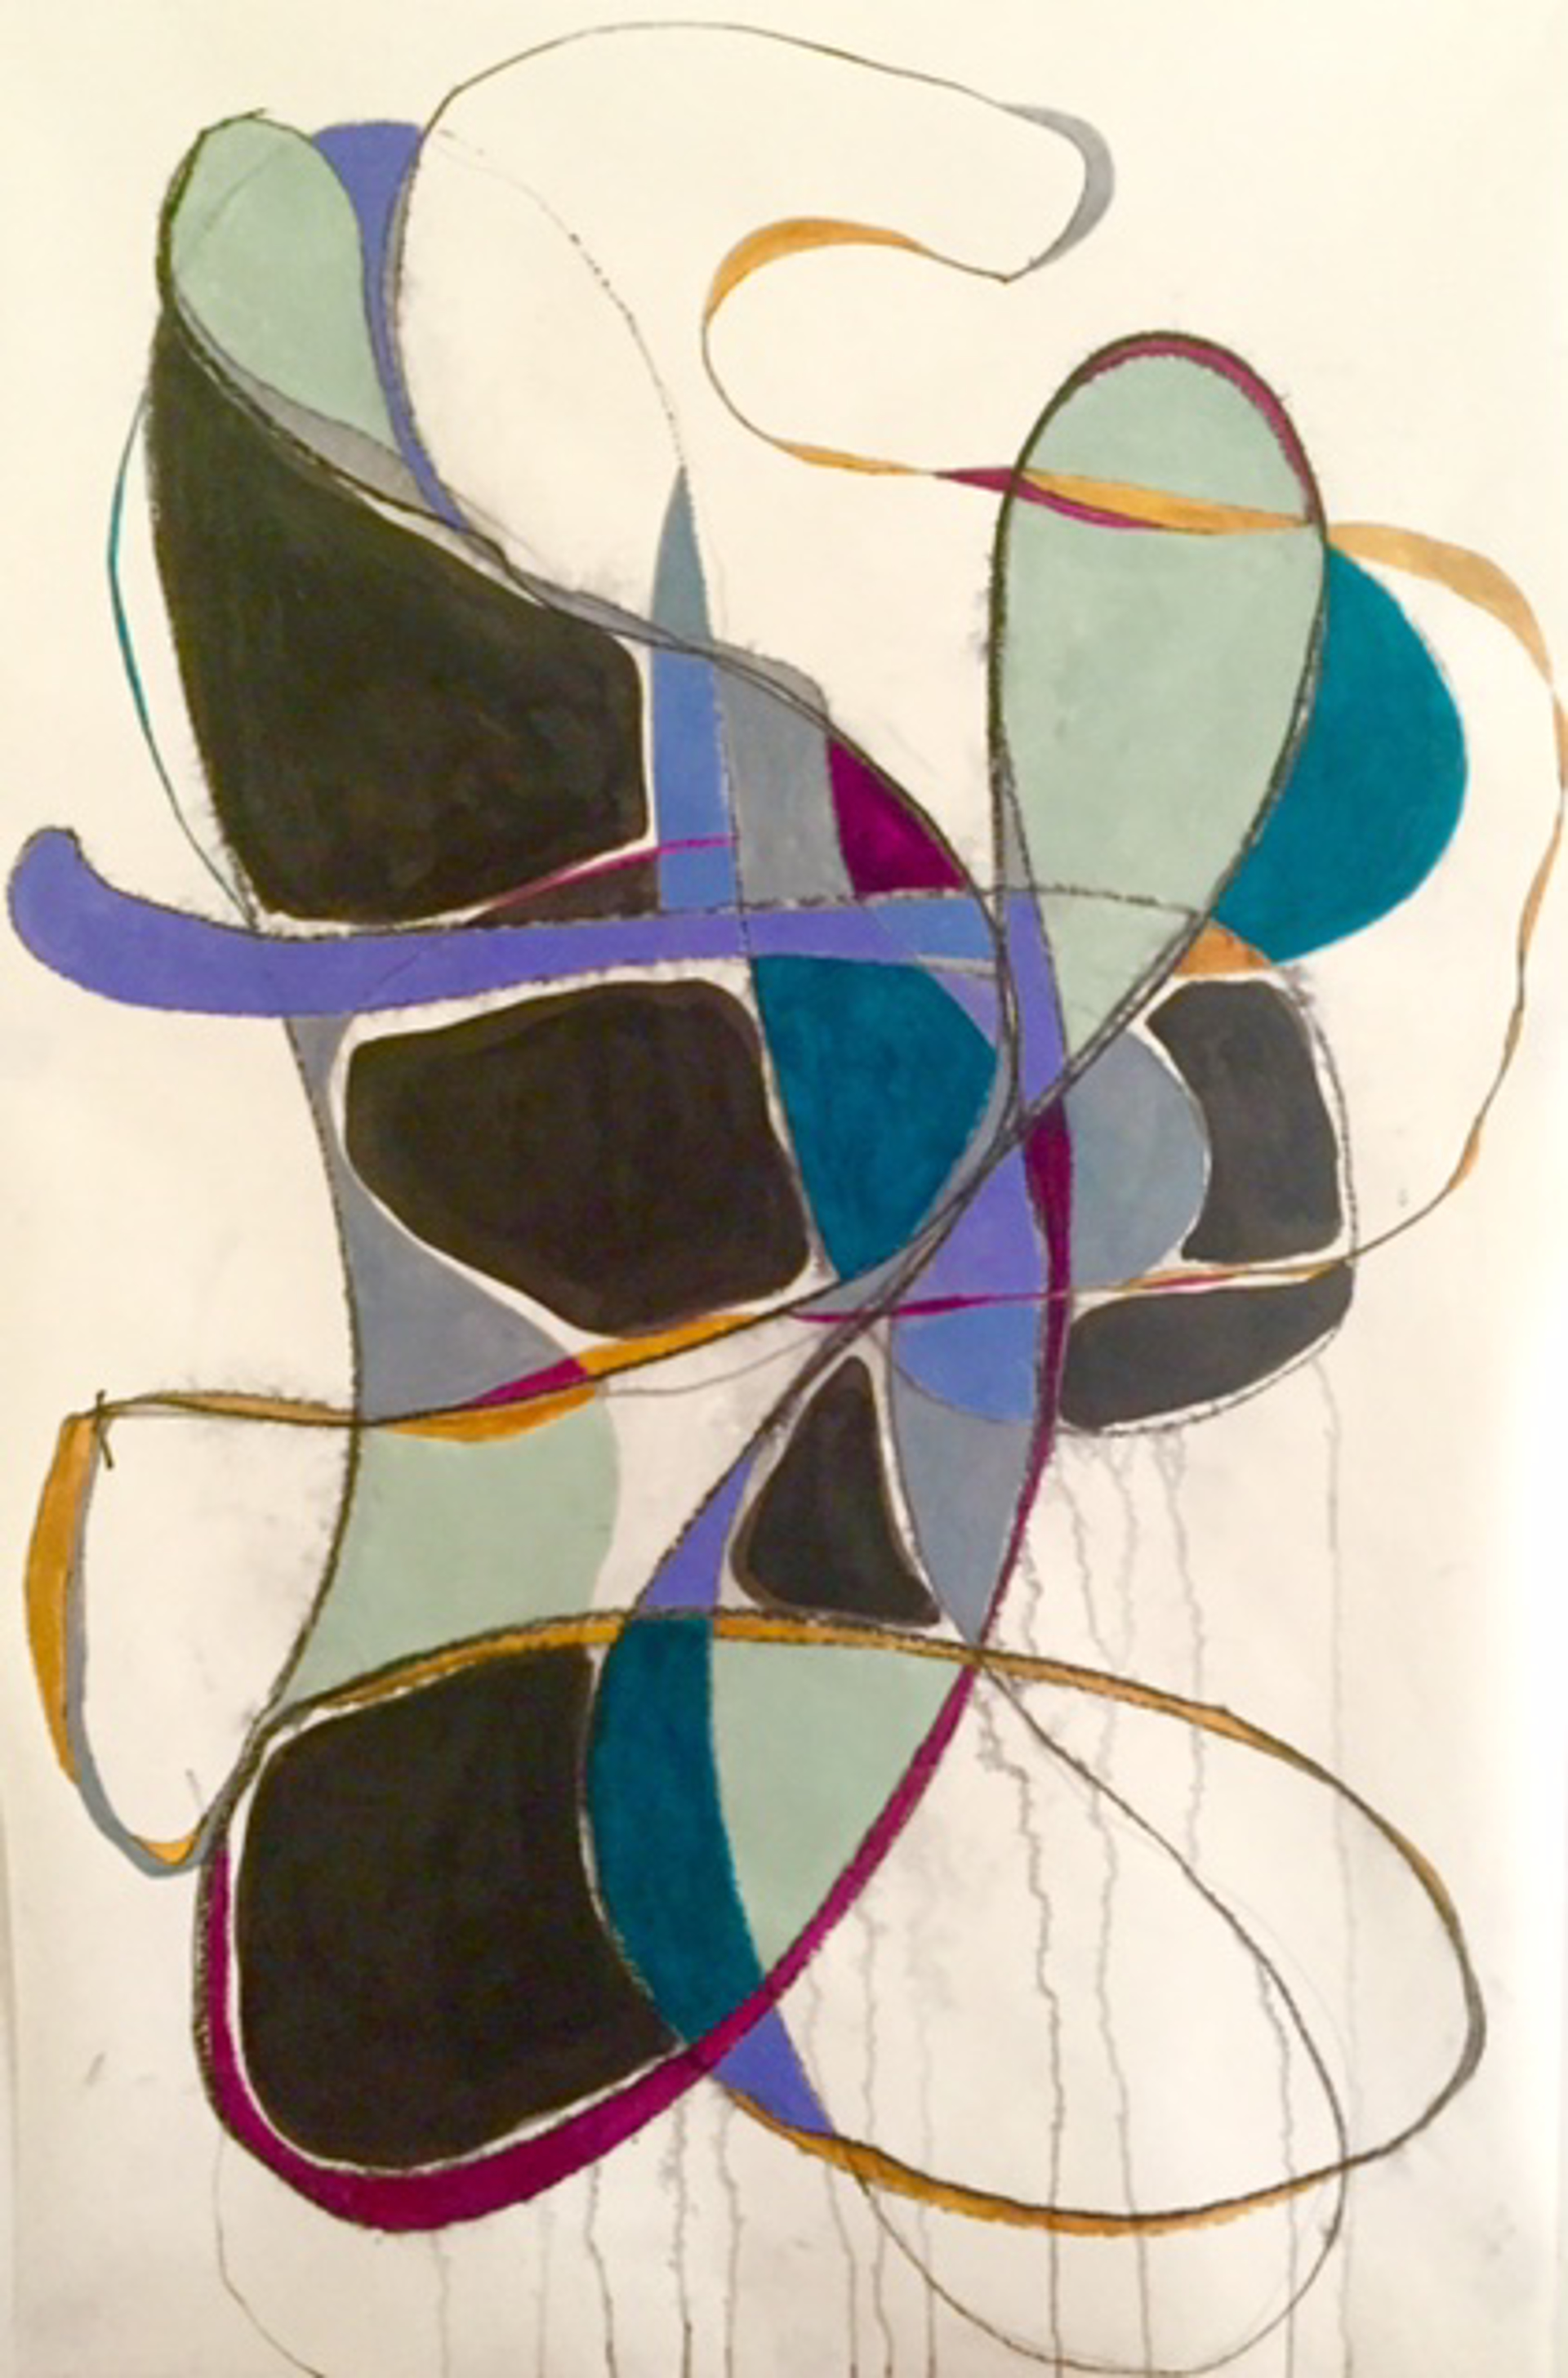 Drawing 3 by Tracey Adams